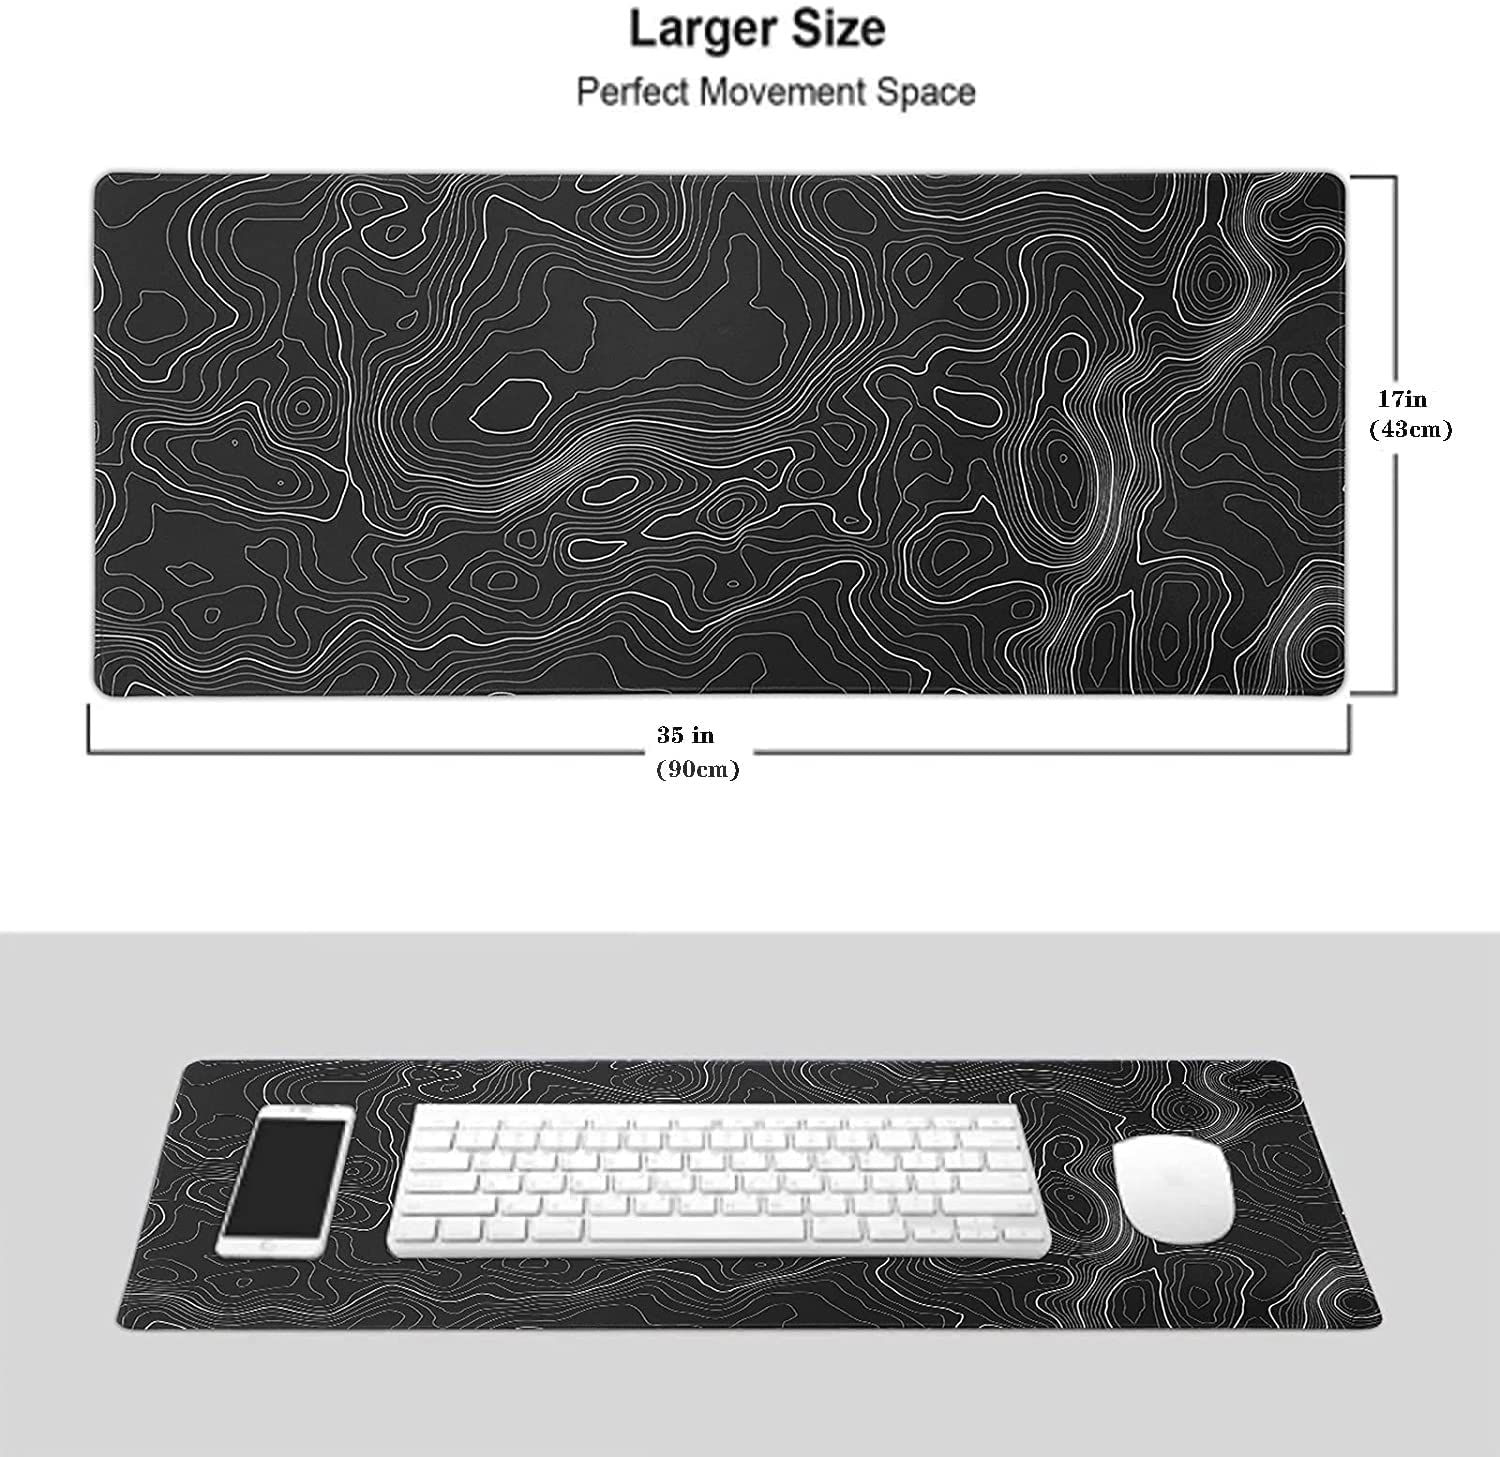 AQQA Large Mouse Pad Mat (35x17 in) Extended XXXL Gaming Mouse Pad with Non-Slip Rubber Base,Background Topographic Map Lines Contour Geographic for Gaming Office Laptop Computer Men Women